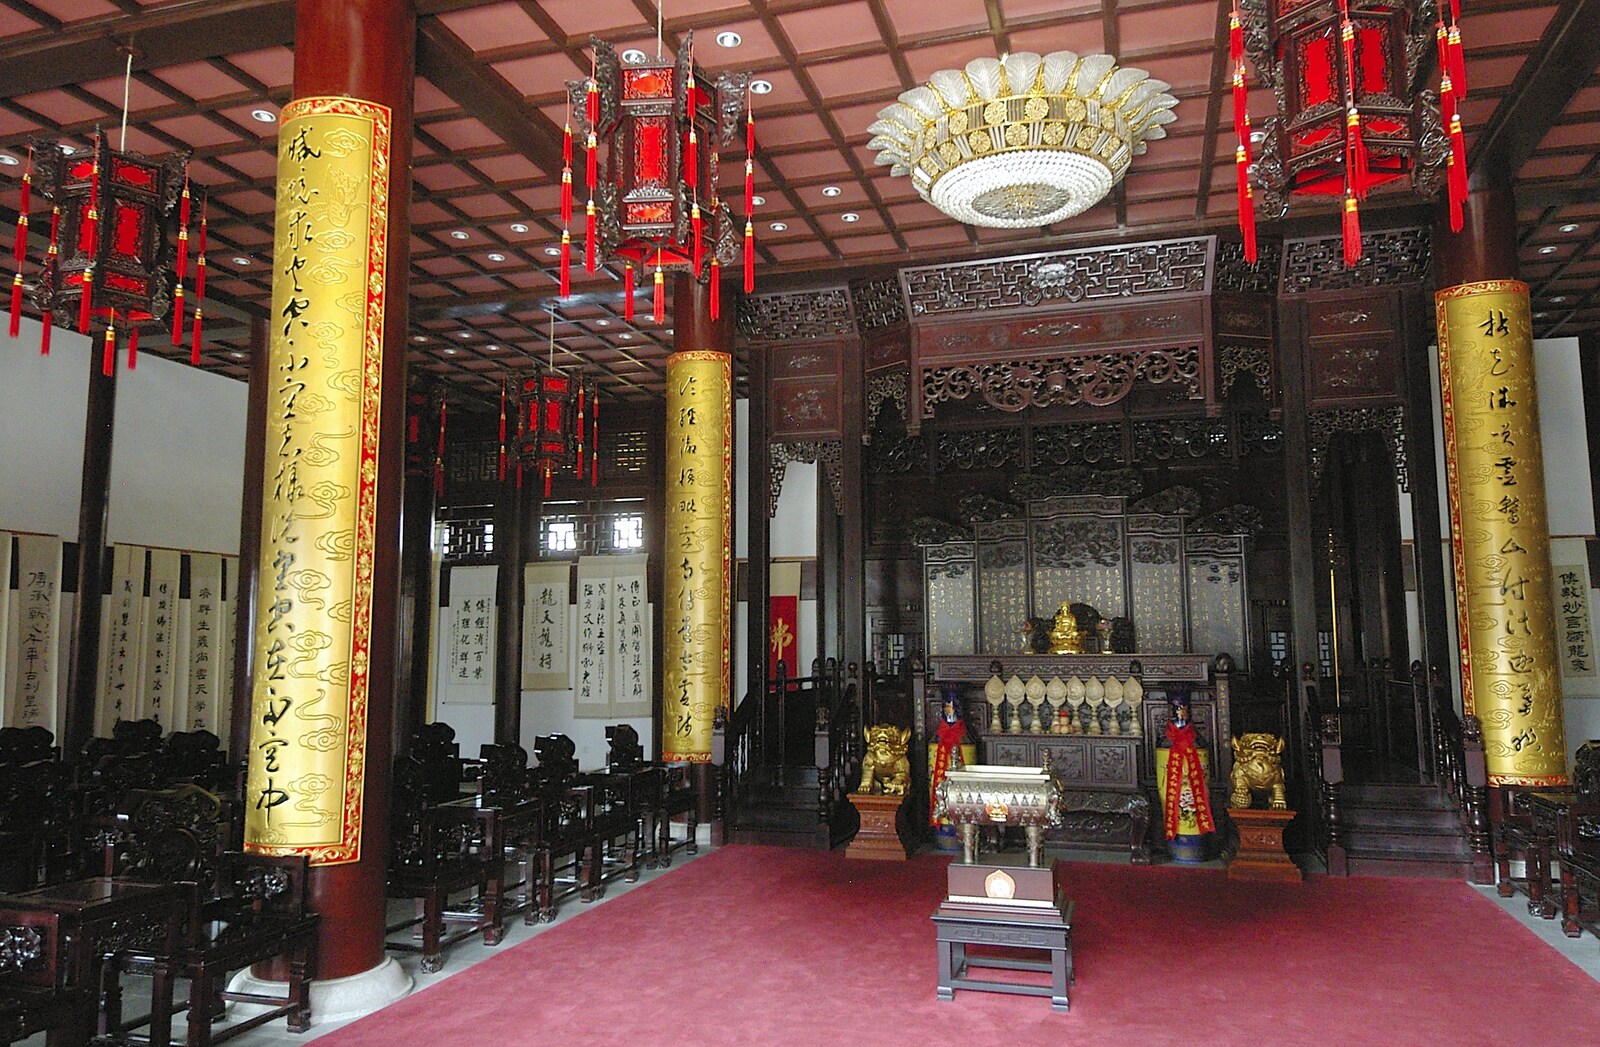 Temple room from A Few Days in Nanjing, Jiangsu Province, China - 7th October 2006